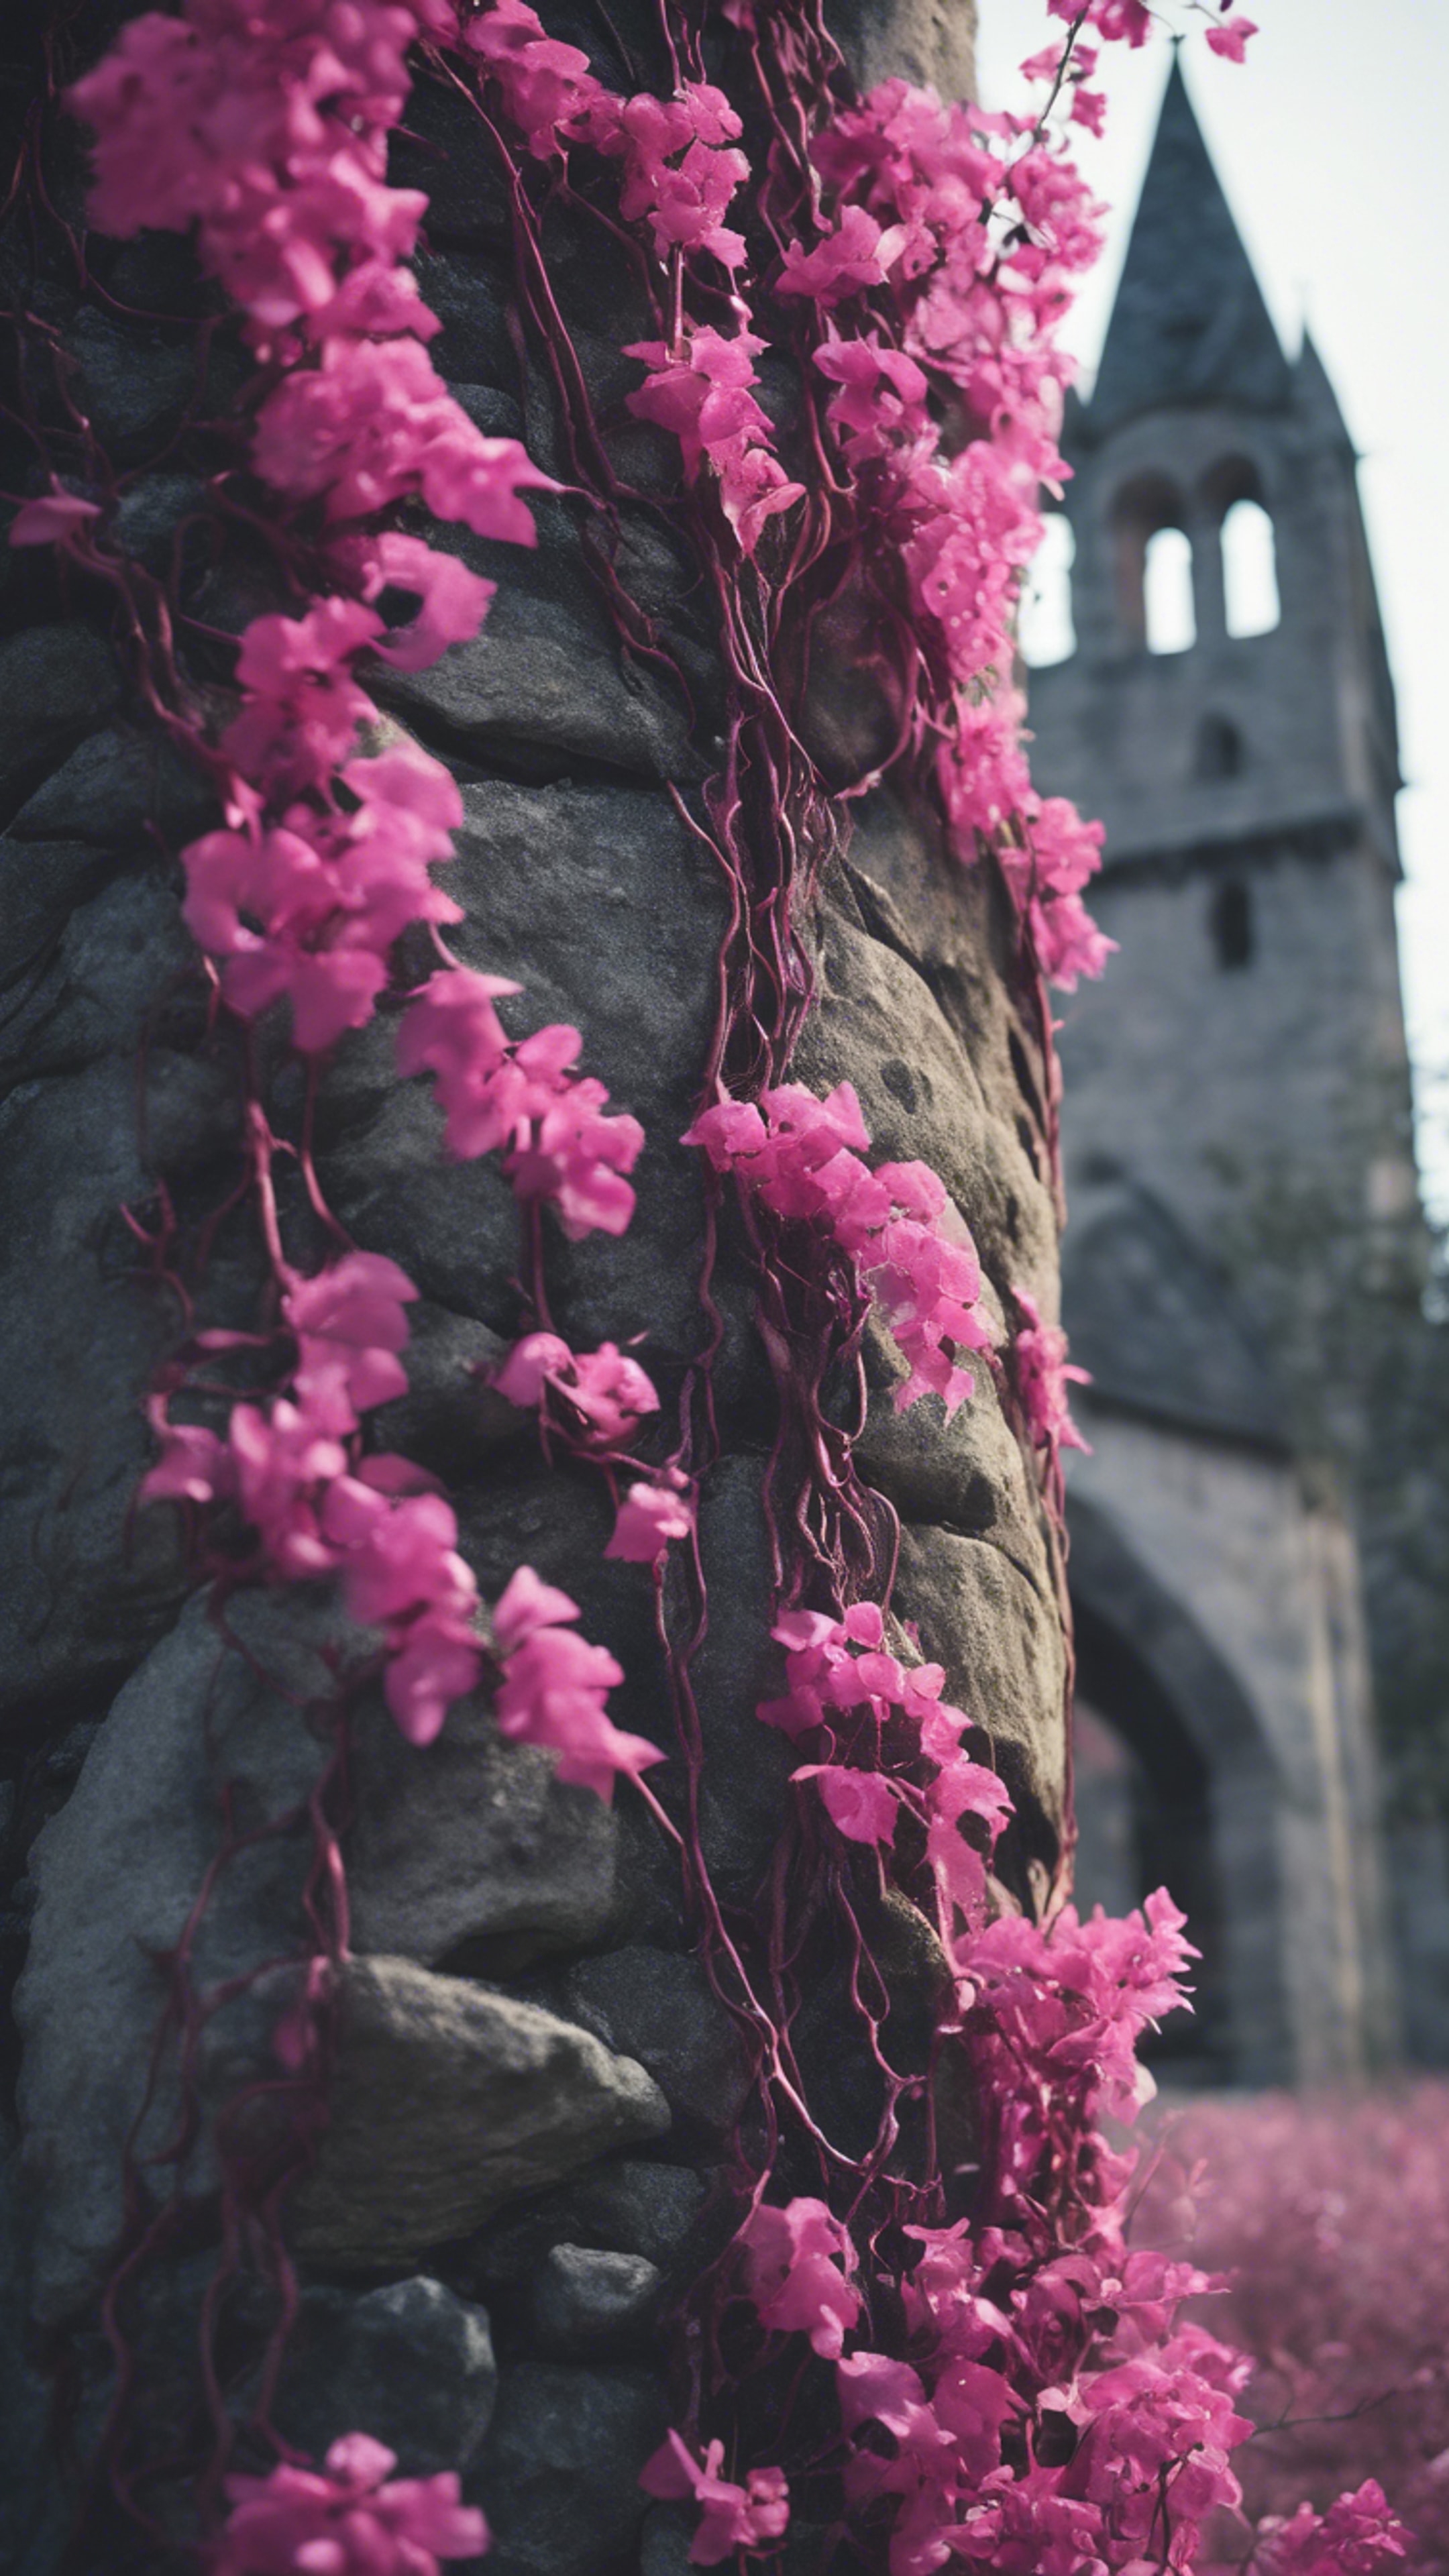 Dark pink Gothic vines creeping up a stone tower. Валлпапер[2209f0af7d054e0296c9]